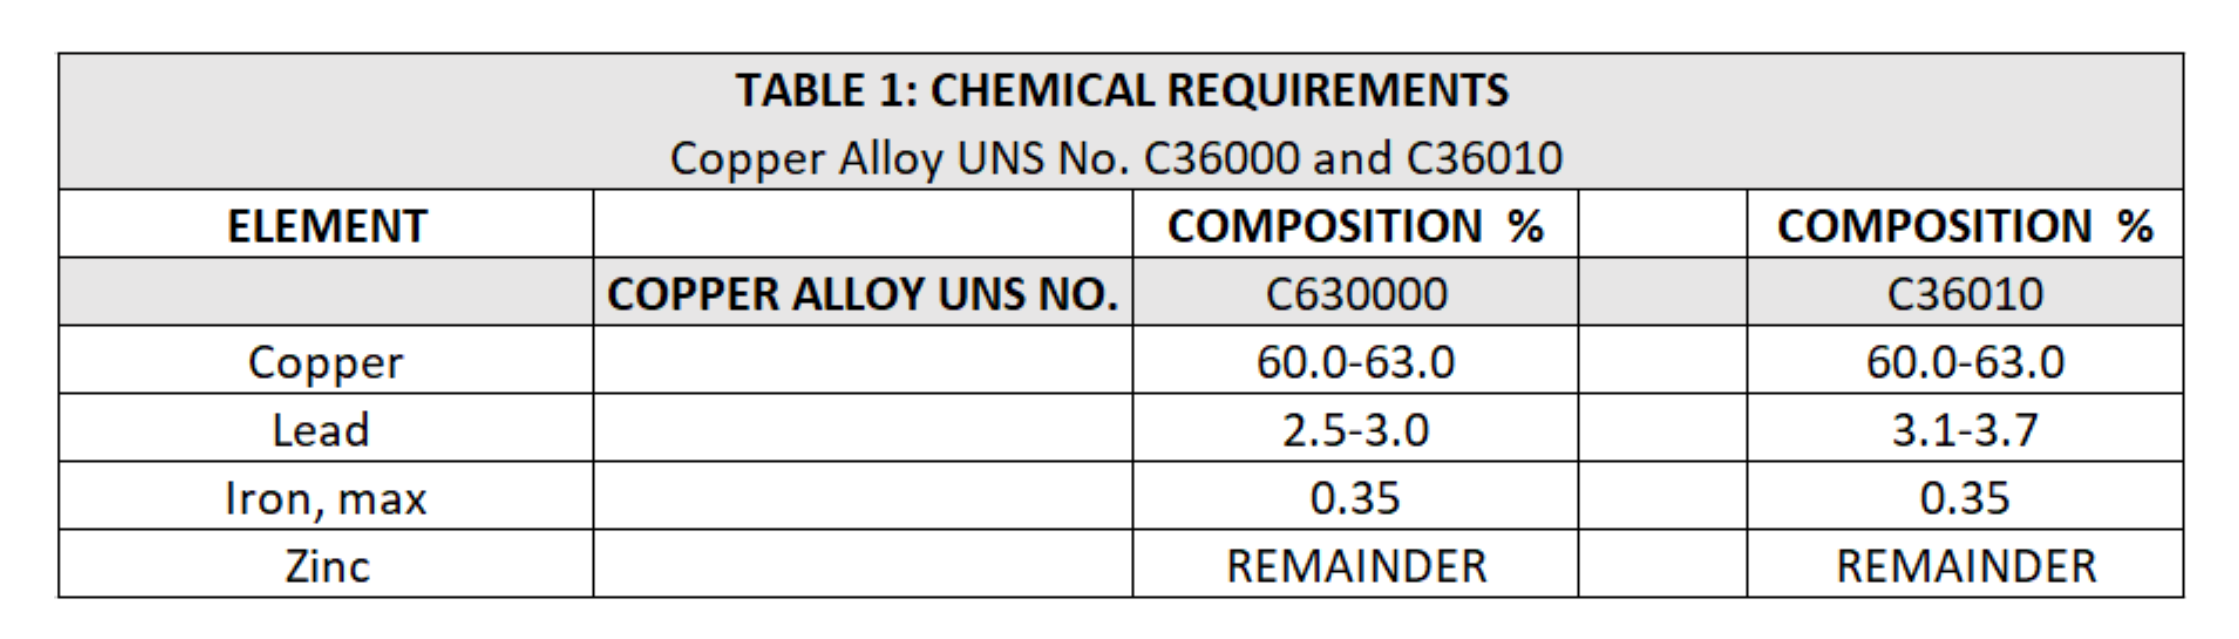 Genfit Chemical Requirements Table-1